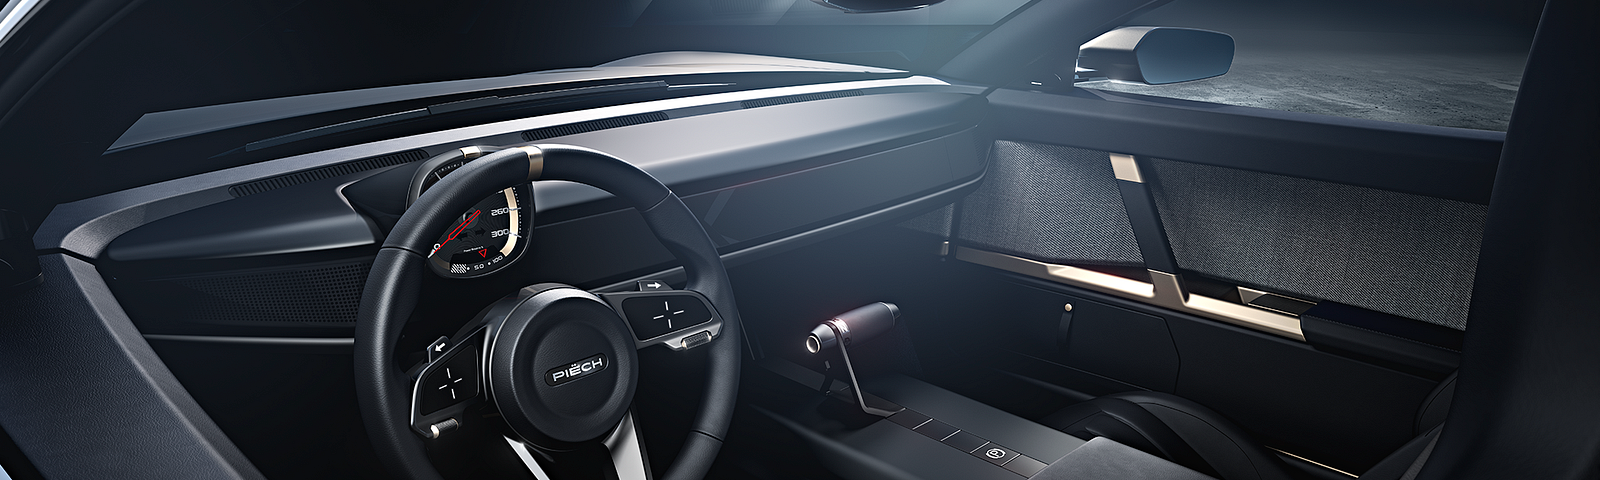 Incari formed a development partnership with Piëch Automotive to jointly set new standards in the development of a maximally user-friendly human-machine interface (HMI), with Incari developing the digital cockpit and the entire HMI for the Piëch GT in a record time of just six months. Now, for the first time ever, the interior of the road-ready prototype of the two-seater electric sports car, which will be launched in 2024, has been unveiled.